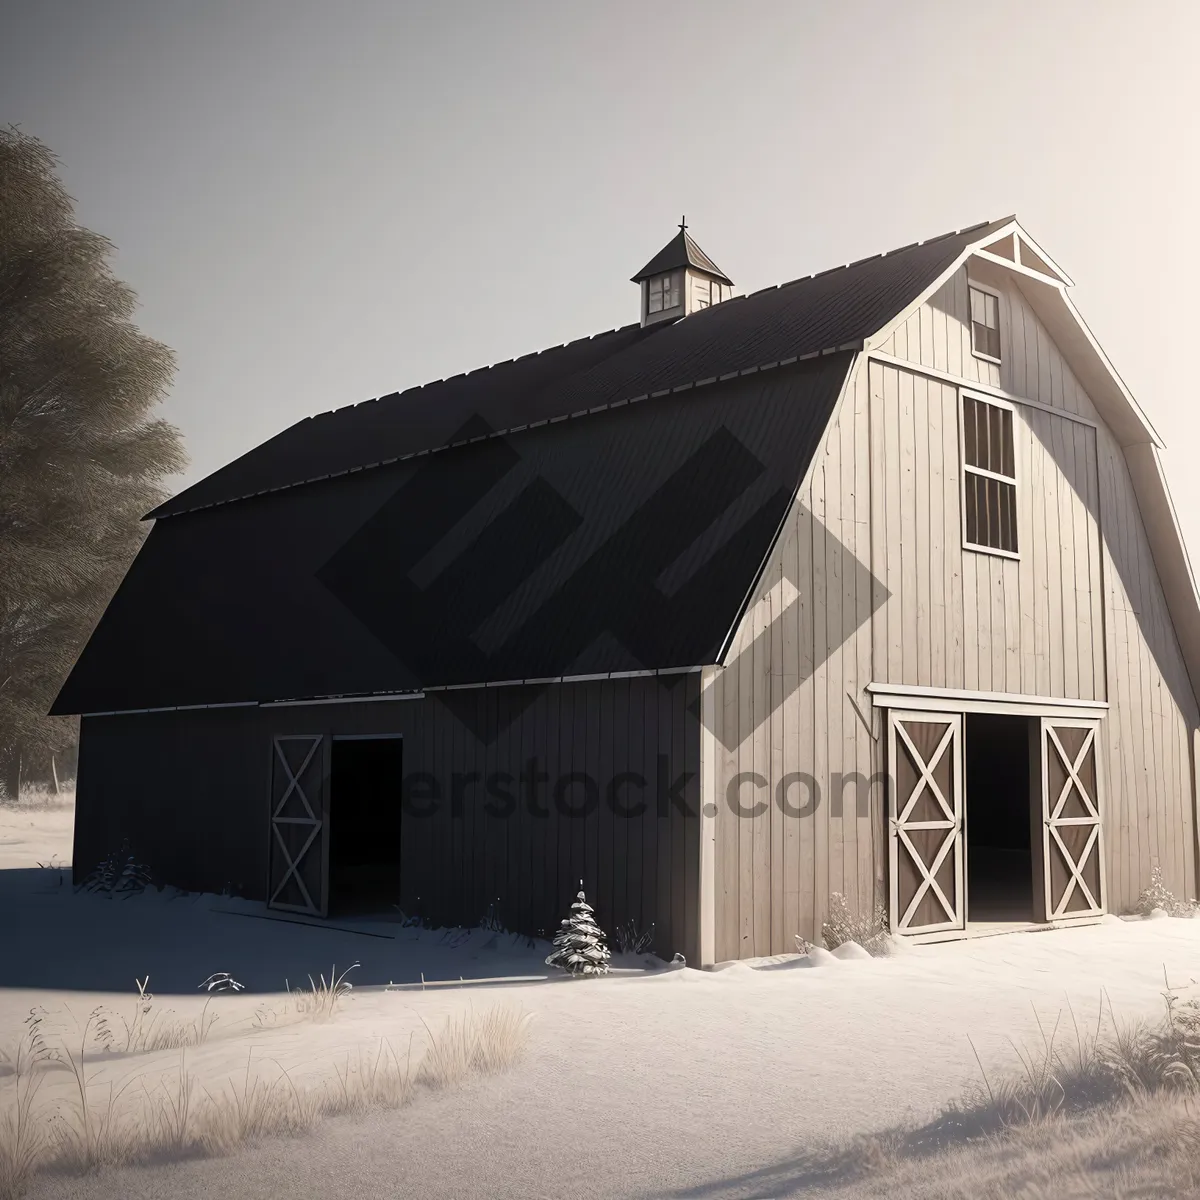 Picture of Rustic Farmhouse under Clear Country Sky